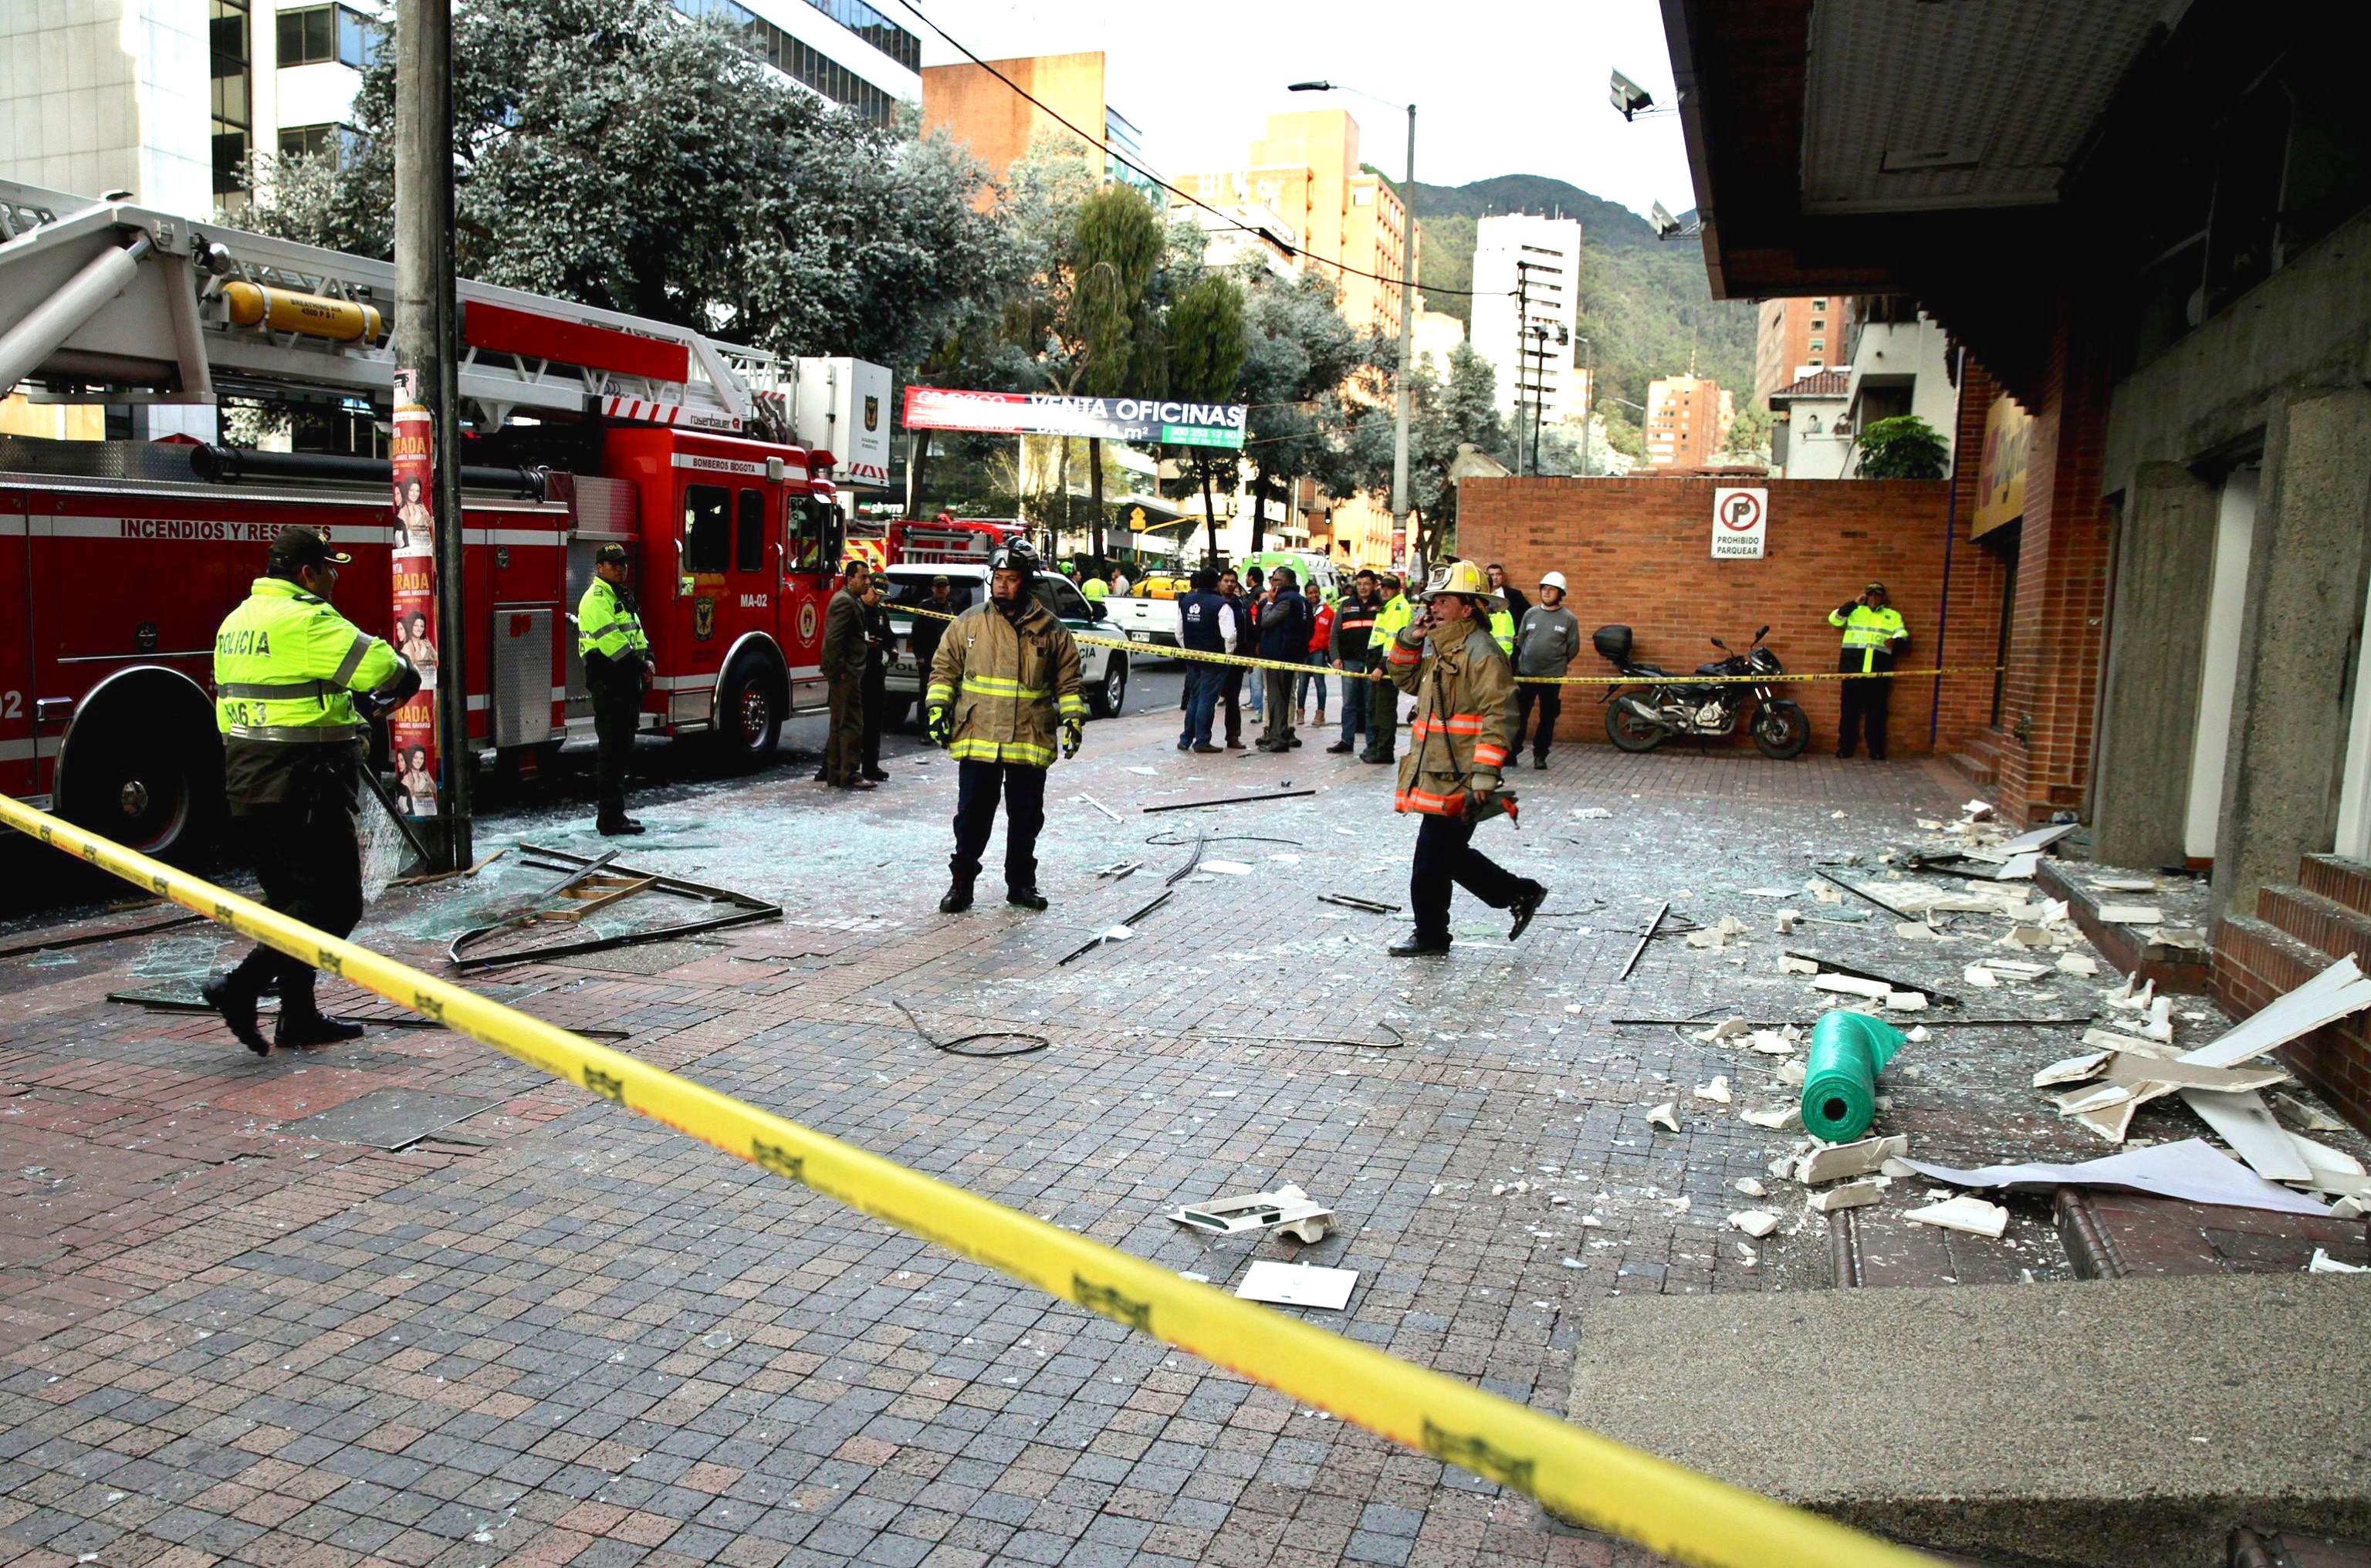 Firefighters work at the location where a device exploded in Bogota